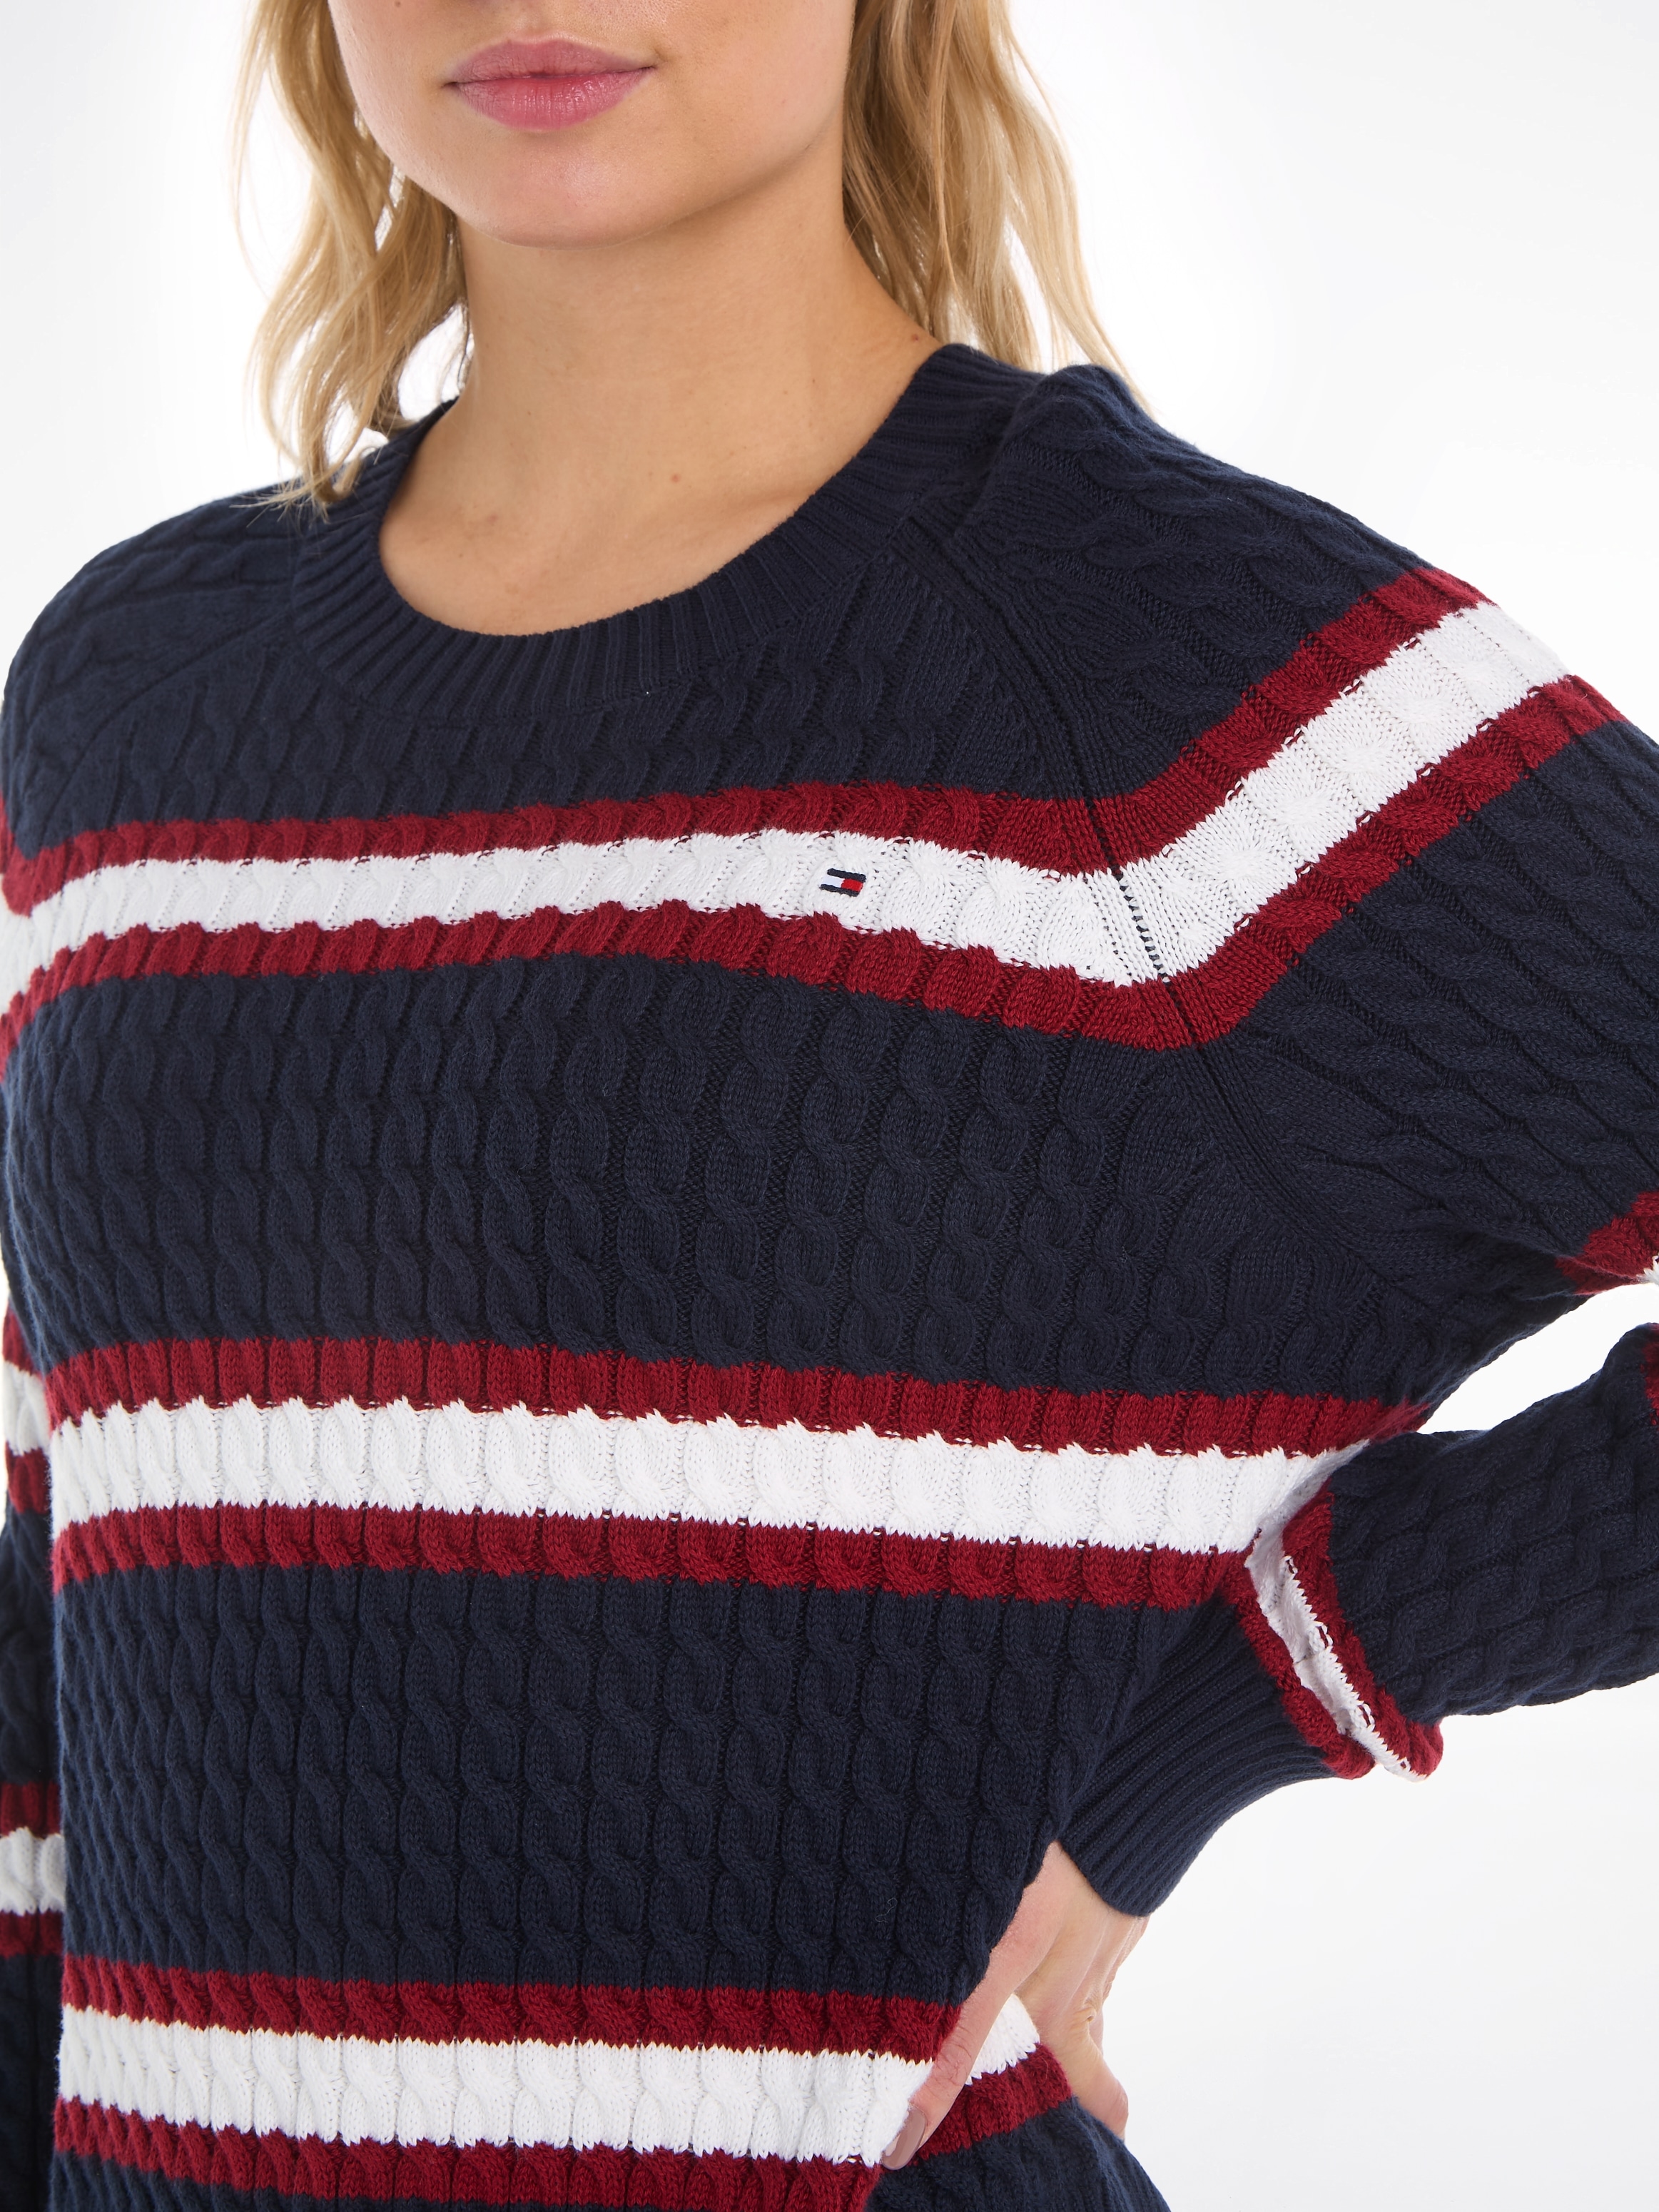 MINI Tommy ♕ bei Strickpullover Hilfiger »CO CABLE SWEATER«, mit C-NECK Logostickerei